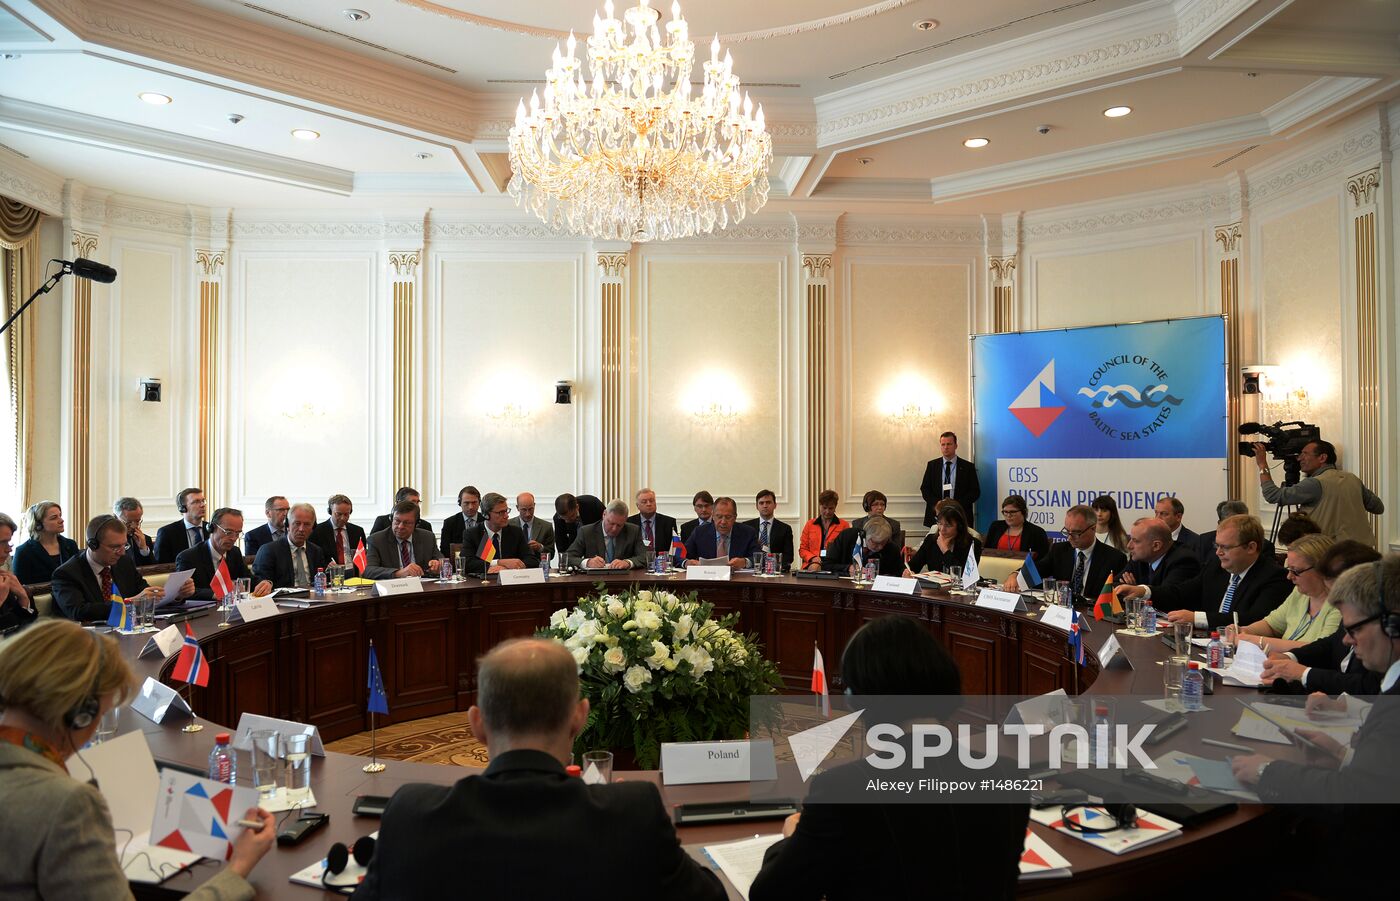 Ministerial Session of the Council of Baltic Sea States